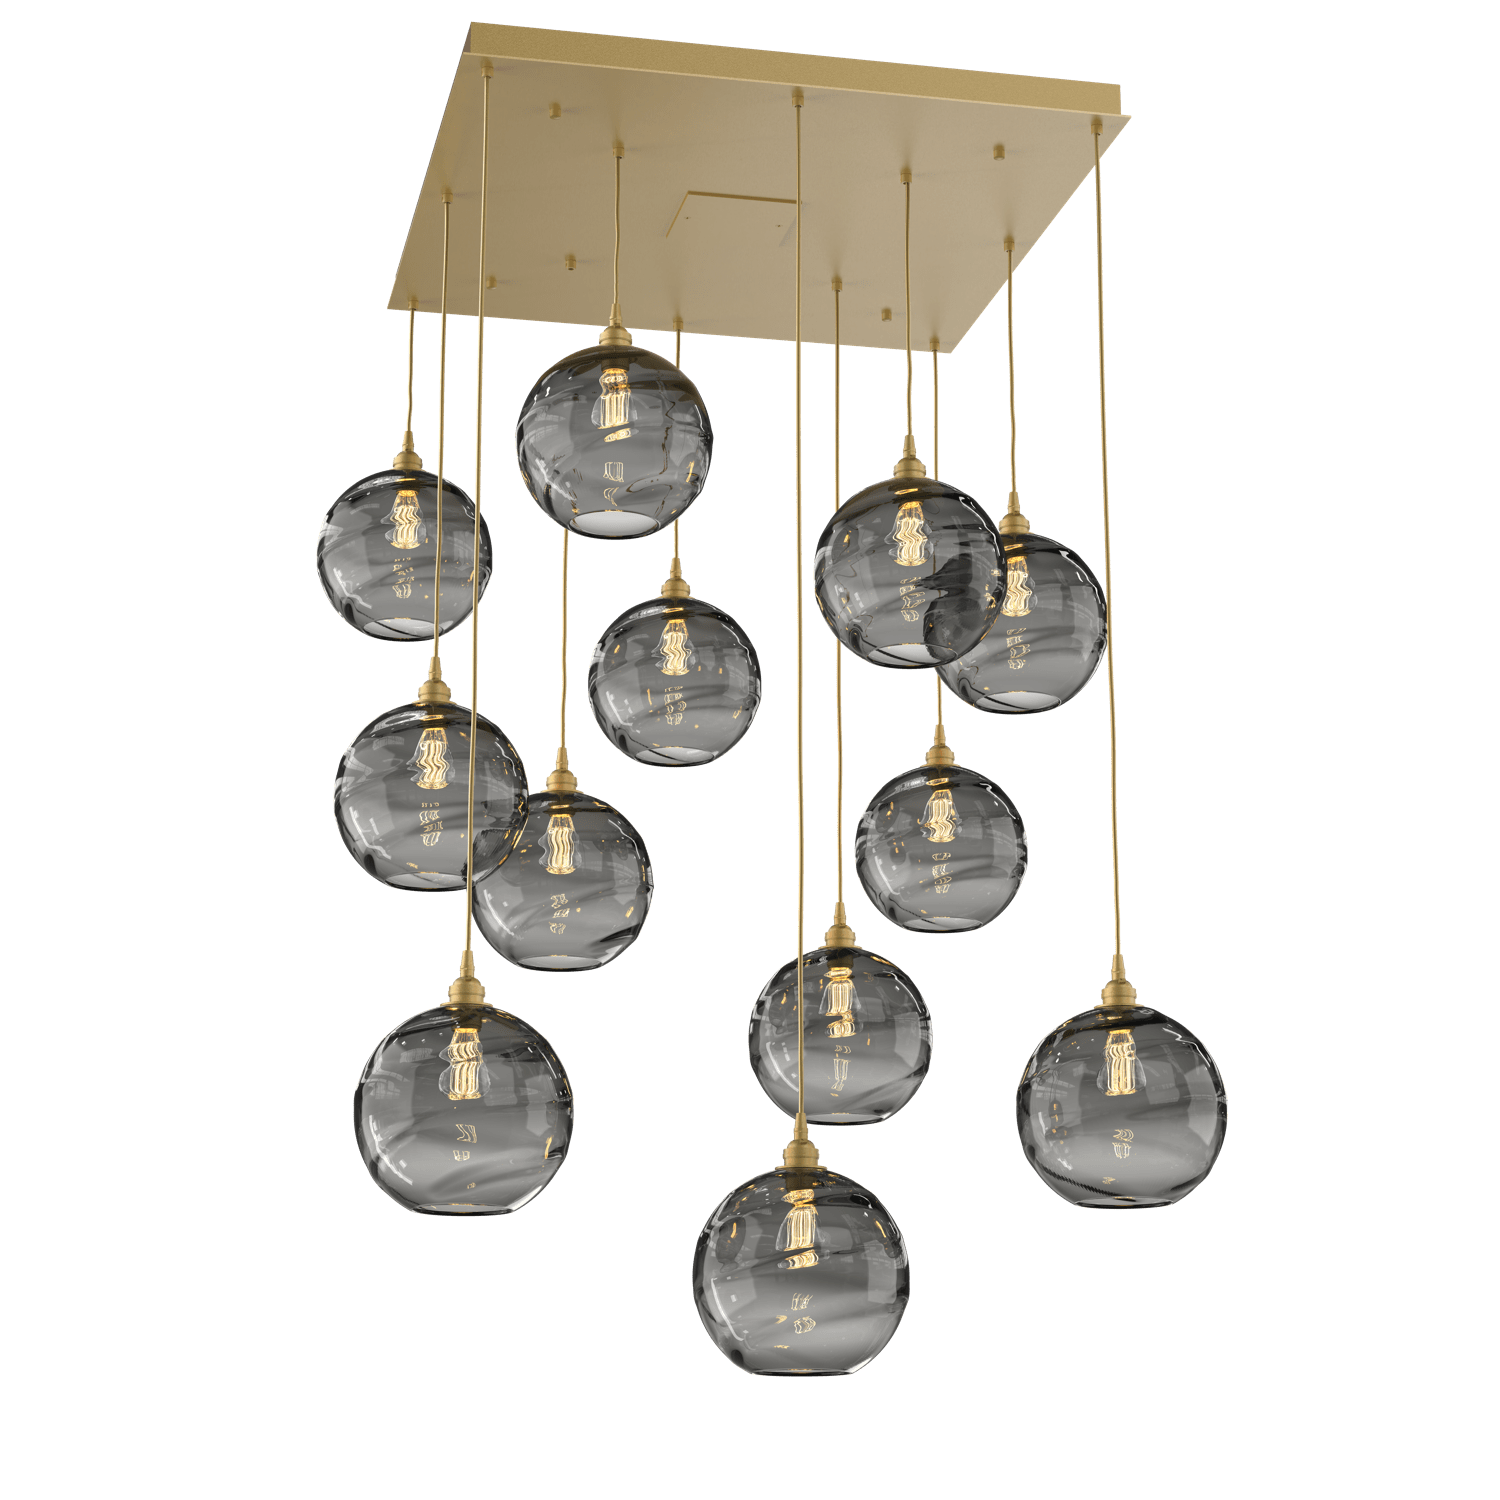 CHB0047-12-GB-OS-Hammerton-Studio-Optic-Blown-Glass-Terra-12-light-square-pendant-chandelier-with-gilded-brass-finish-and-optic-smoke-blown-glass-shades-and-incandescent-lamping